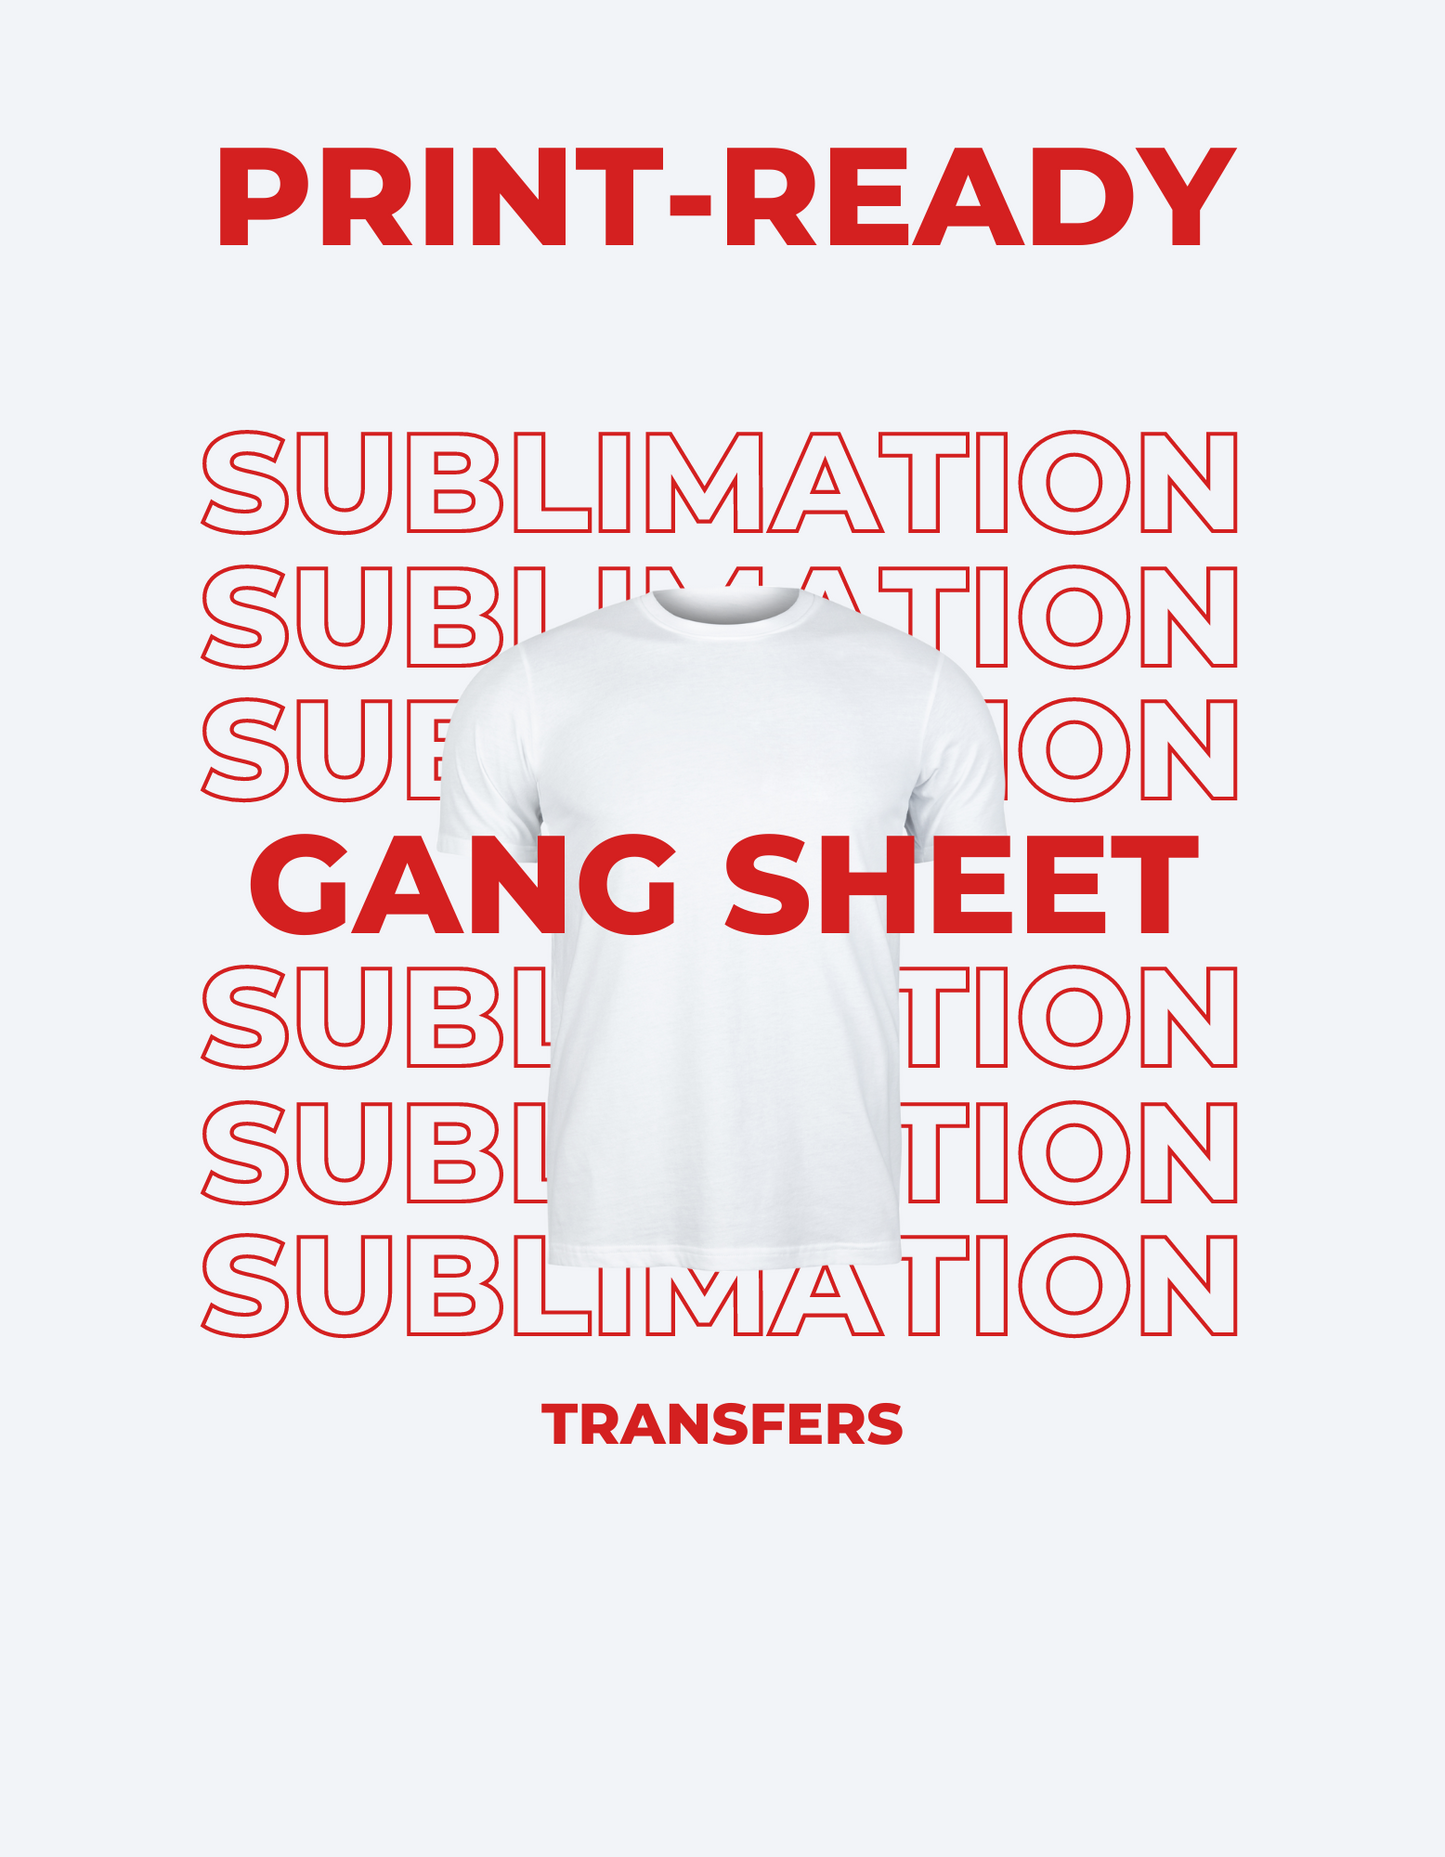 Gang Sheet Sublimation Transfers-Upload Print-Ready File